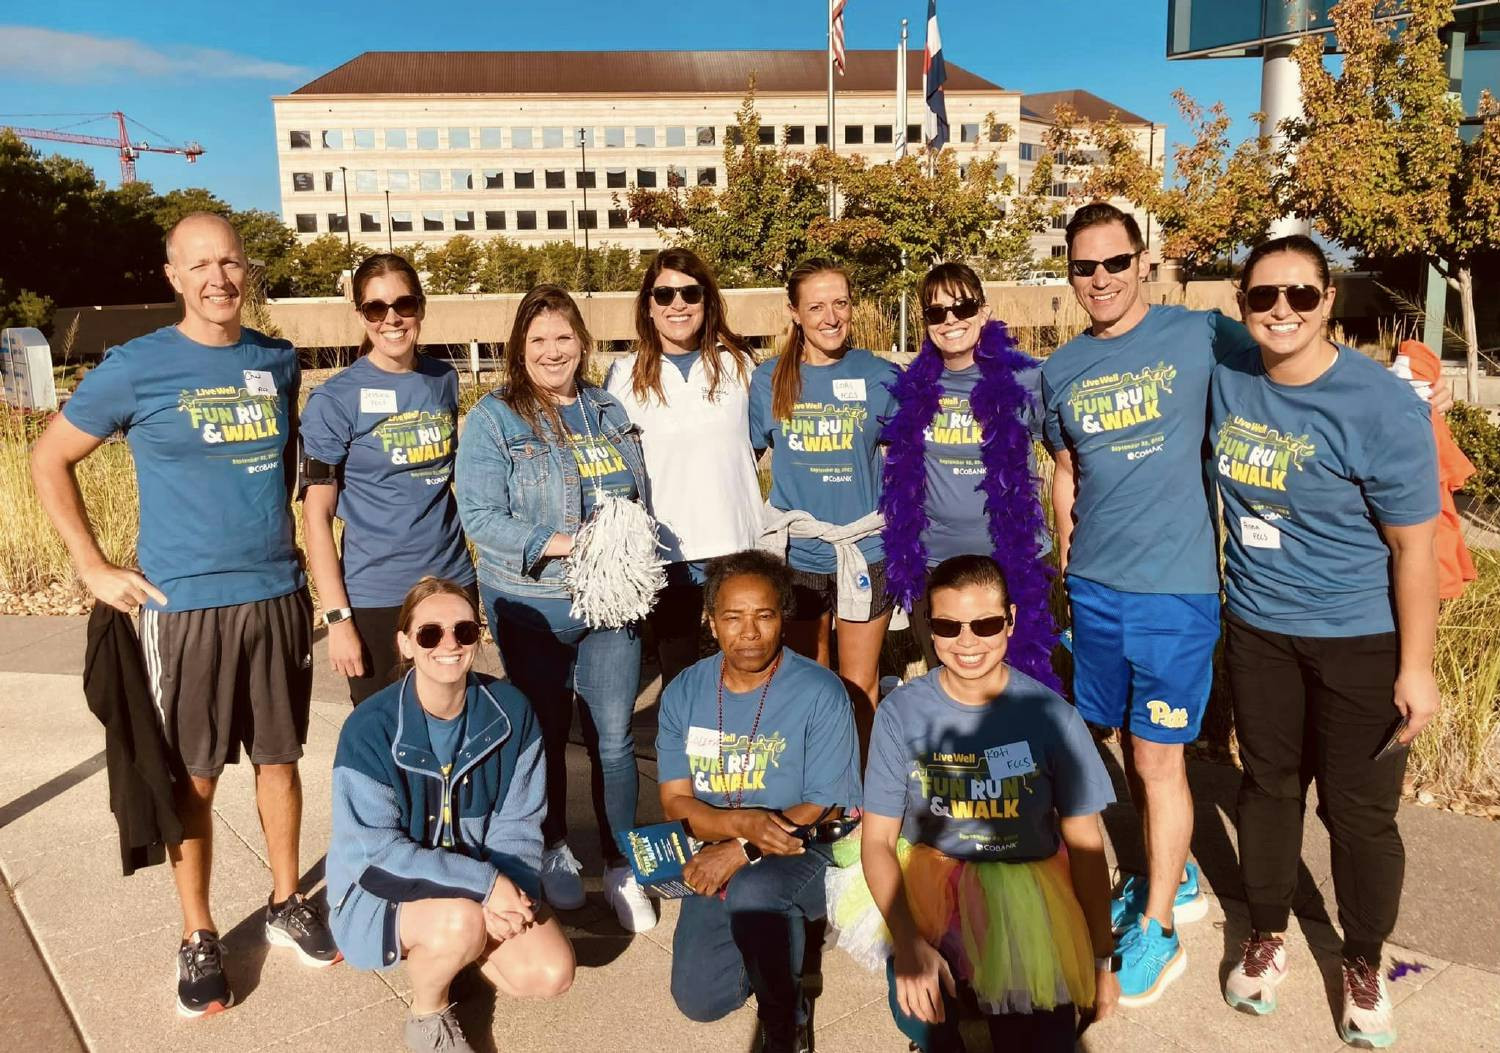 We love staying healthy and participated in a 5k run/walk event in the Denver tech center. 